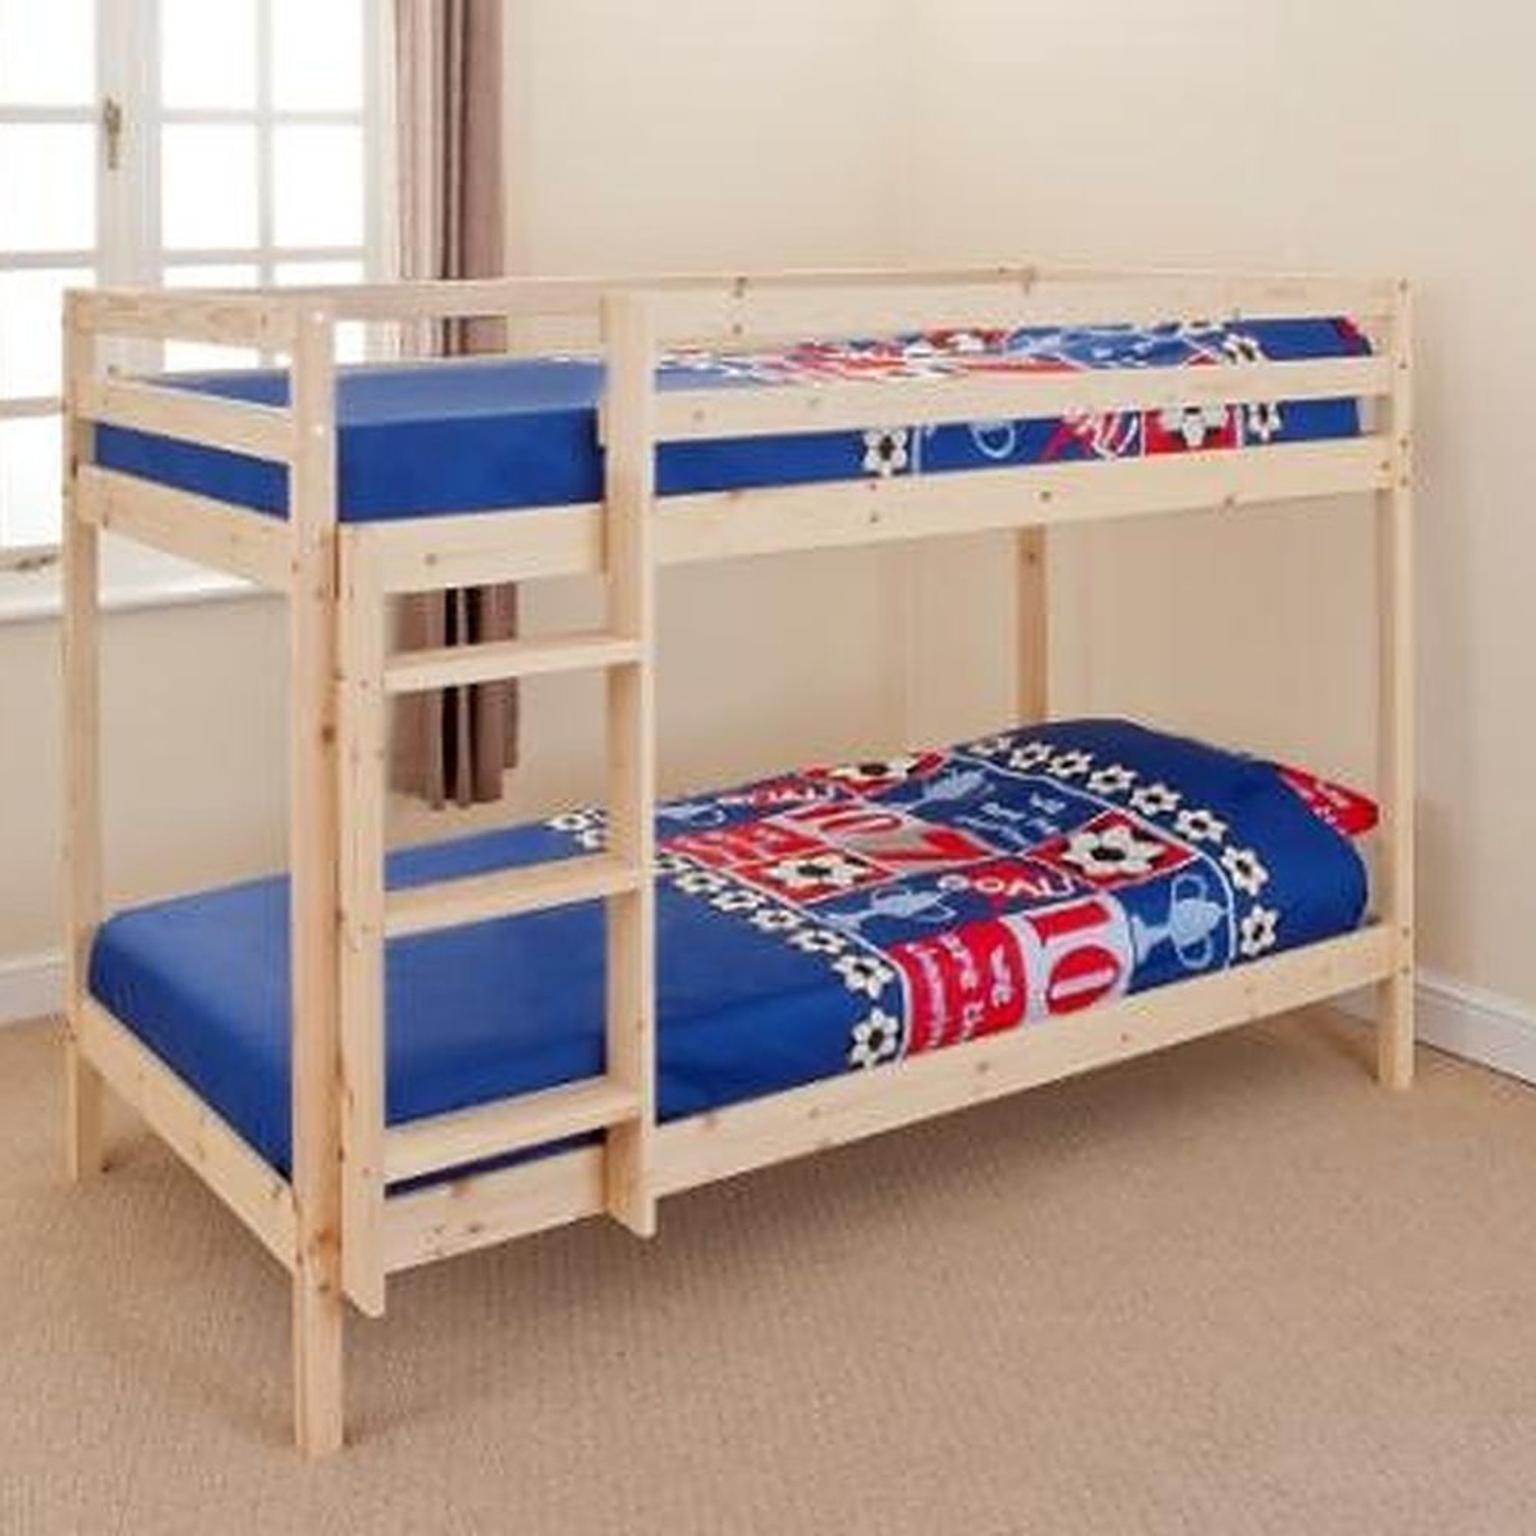 Shorty Bunk Beds Mattresses Available, 6ft Bunk Beds